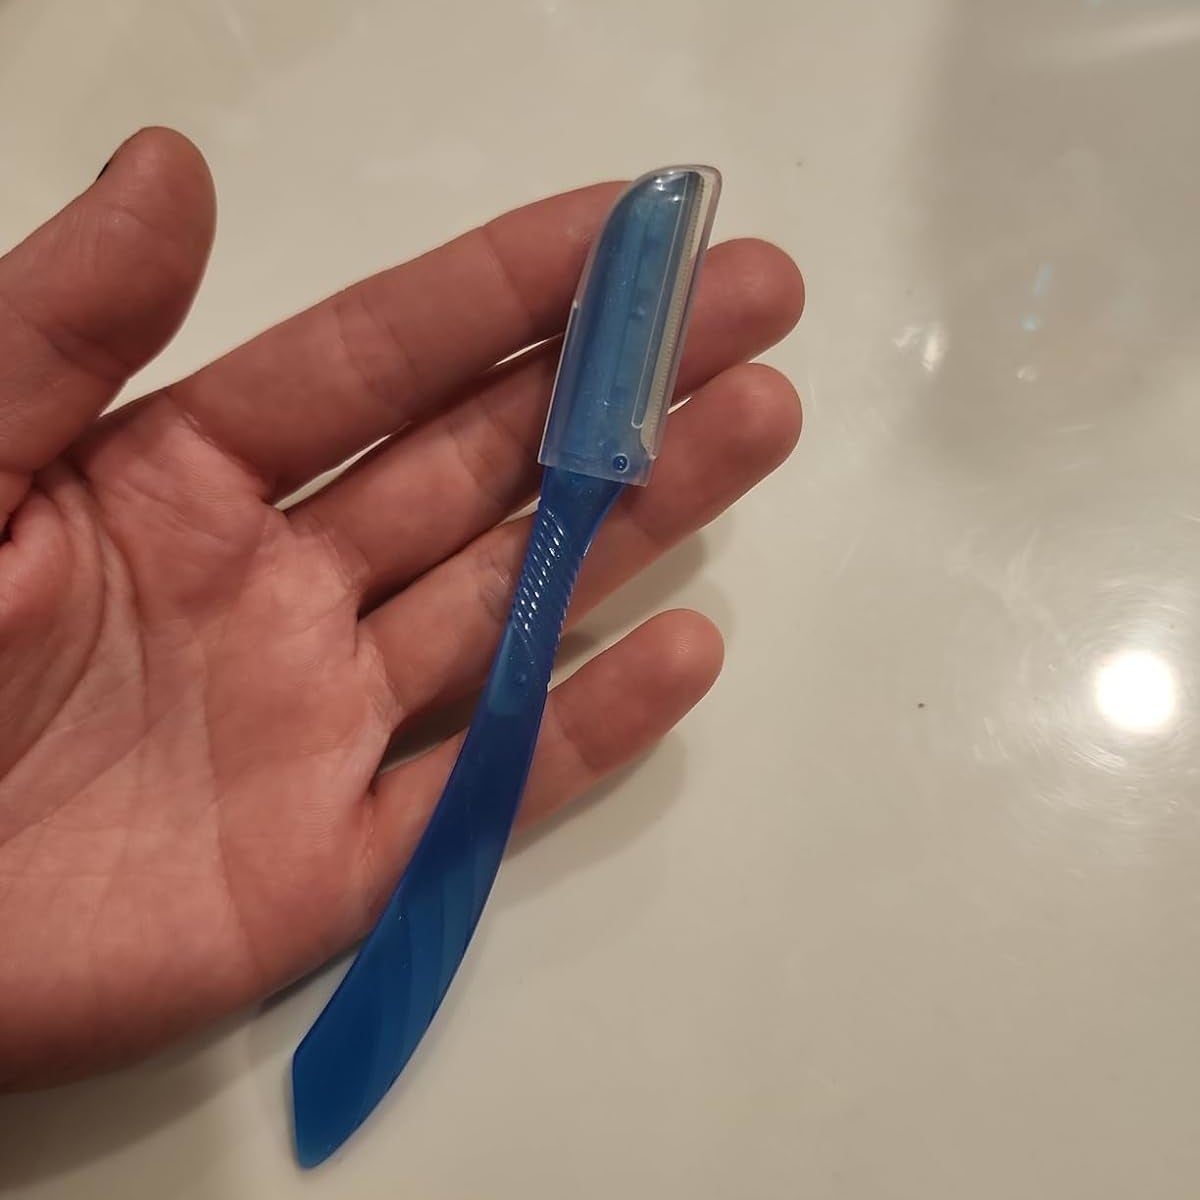 A hand holding a blue disposable plastic razor